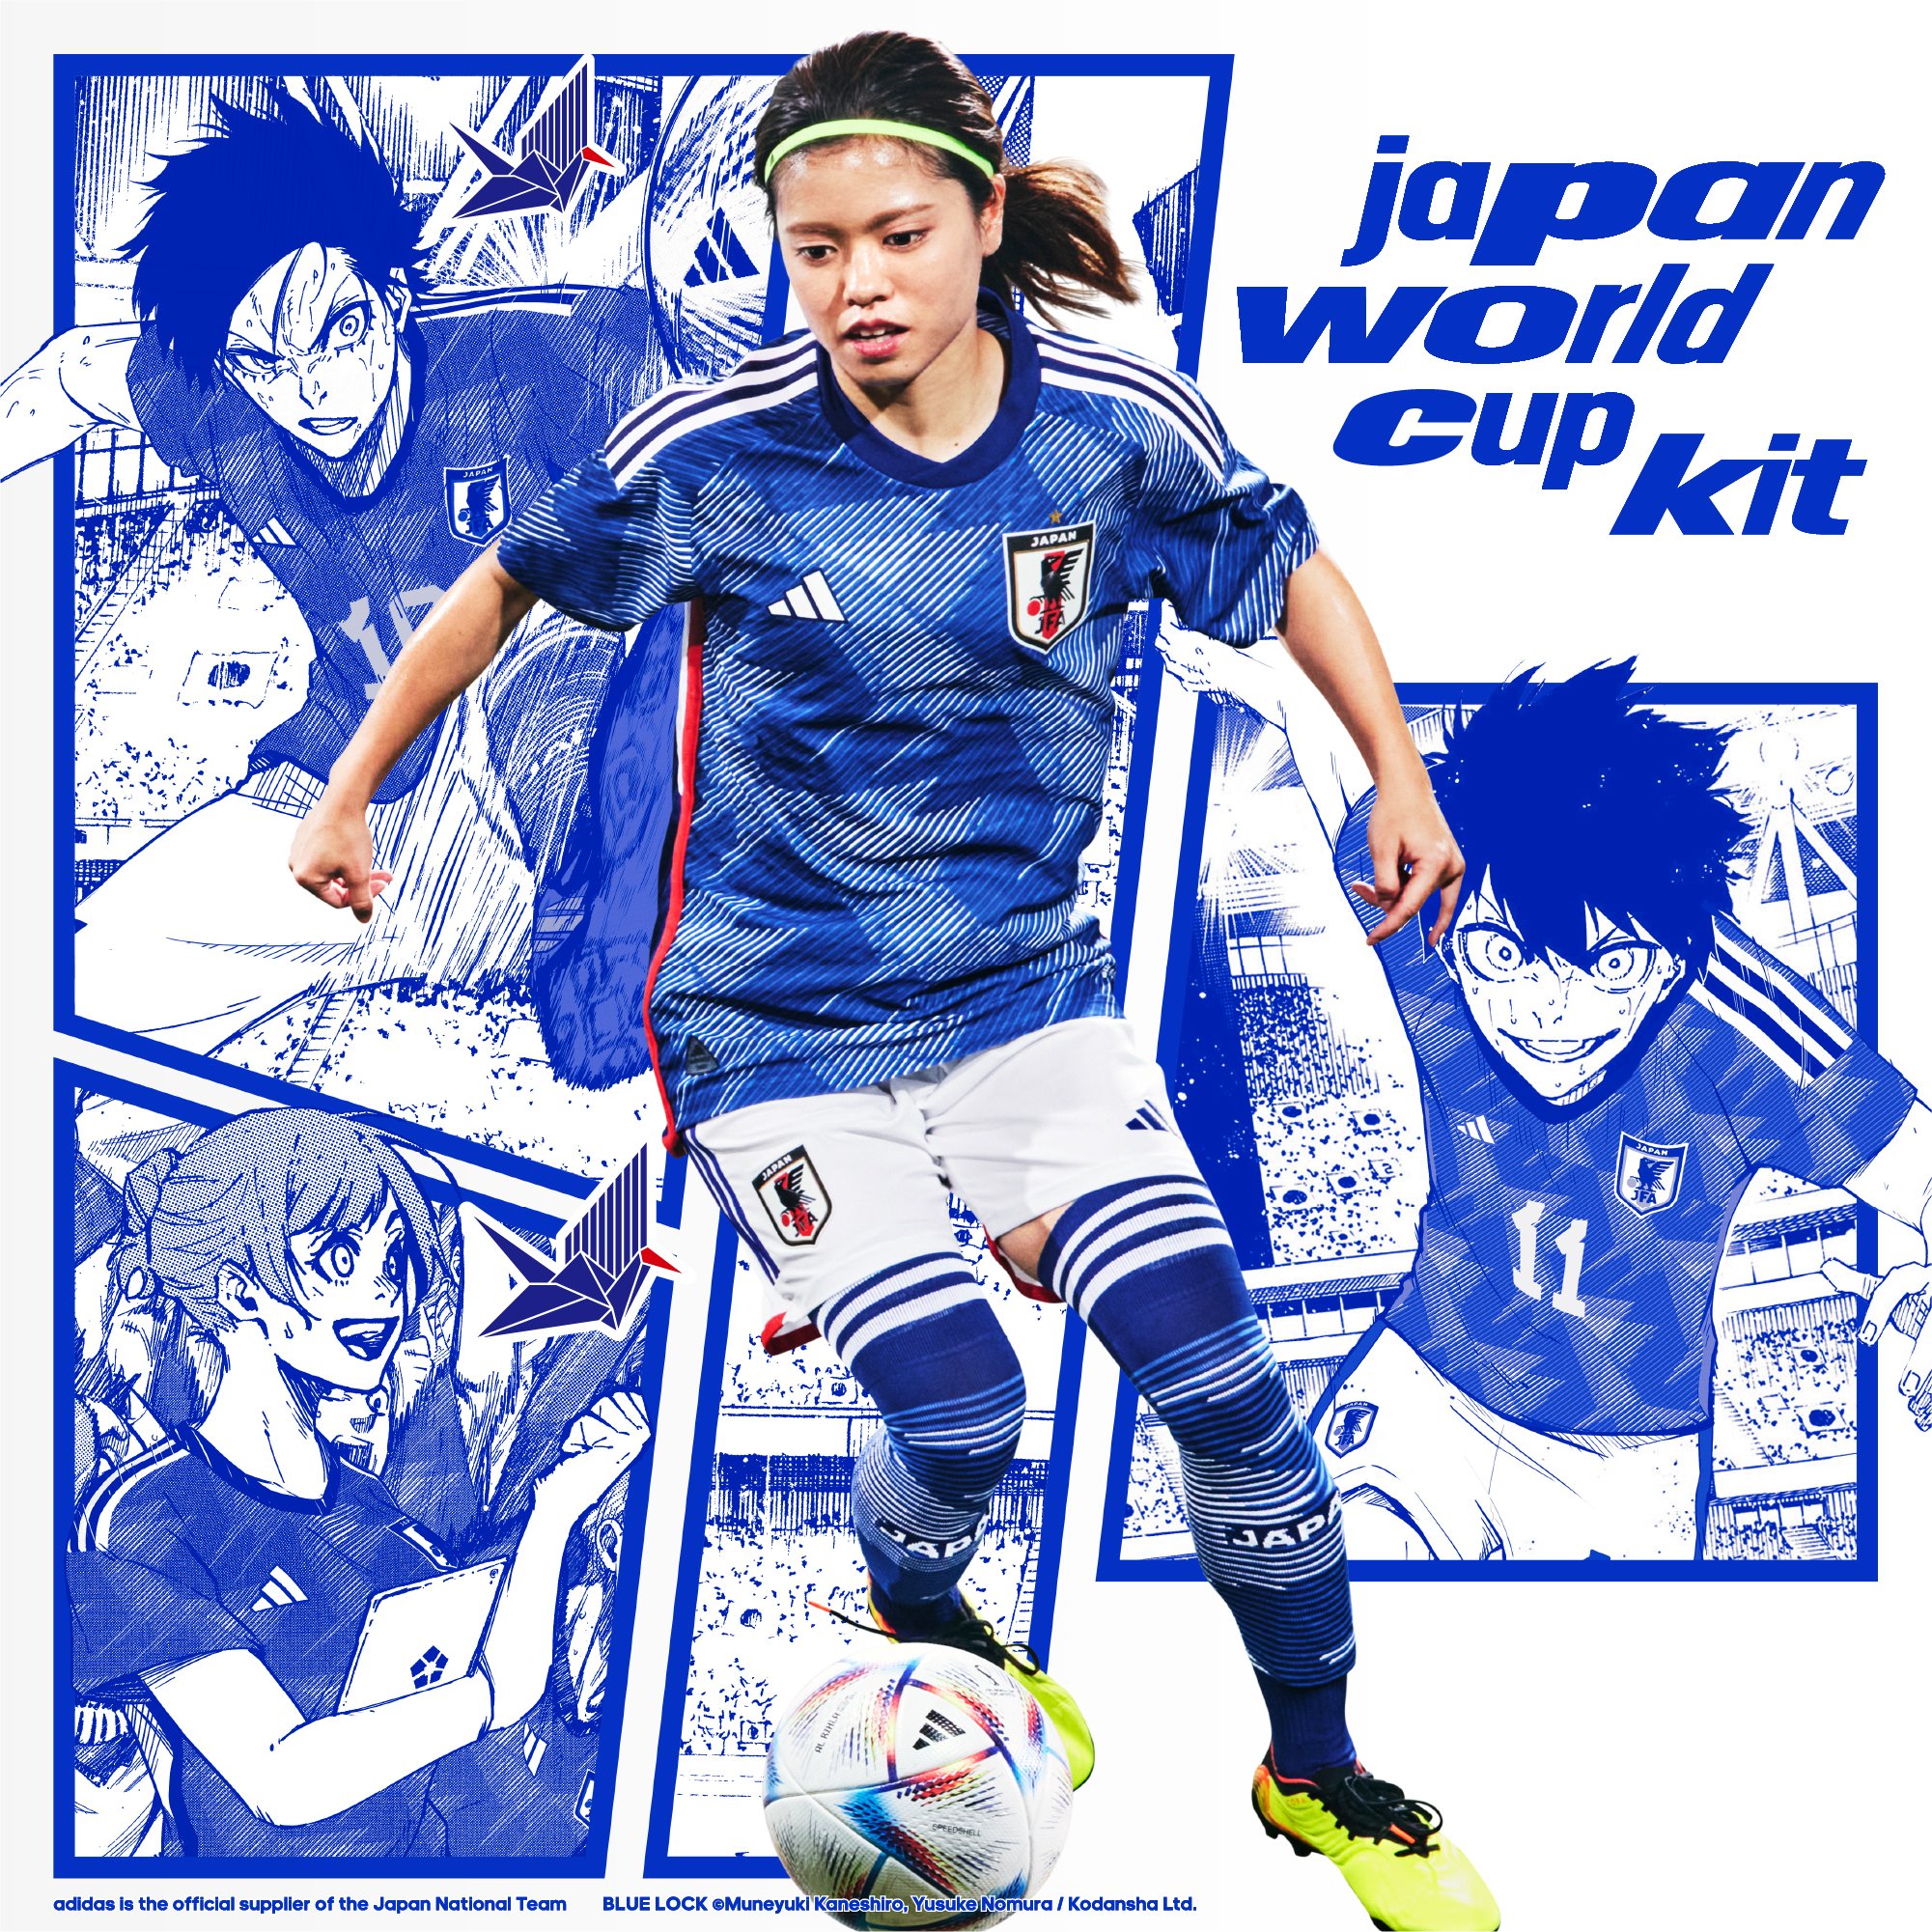 Shonen Magazine News On Twitter Blue Lock And Adidas Collab With Japan National Team Equipment